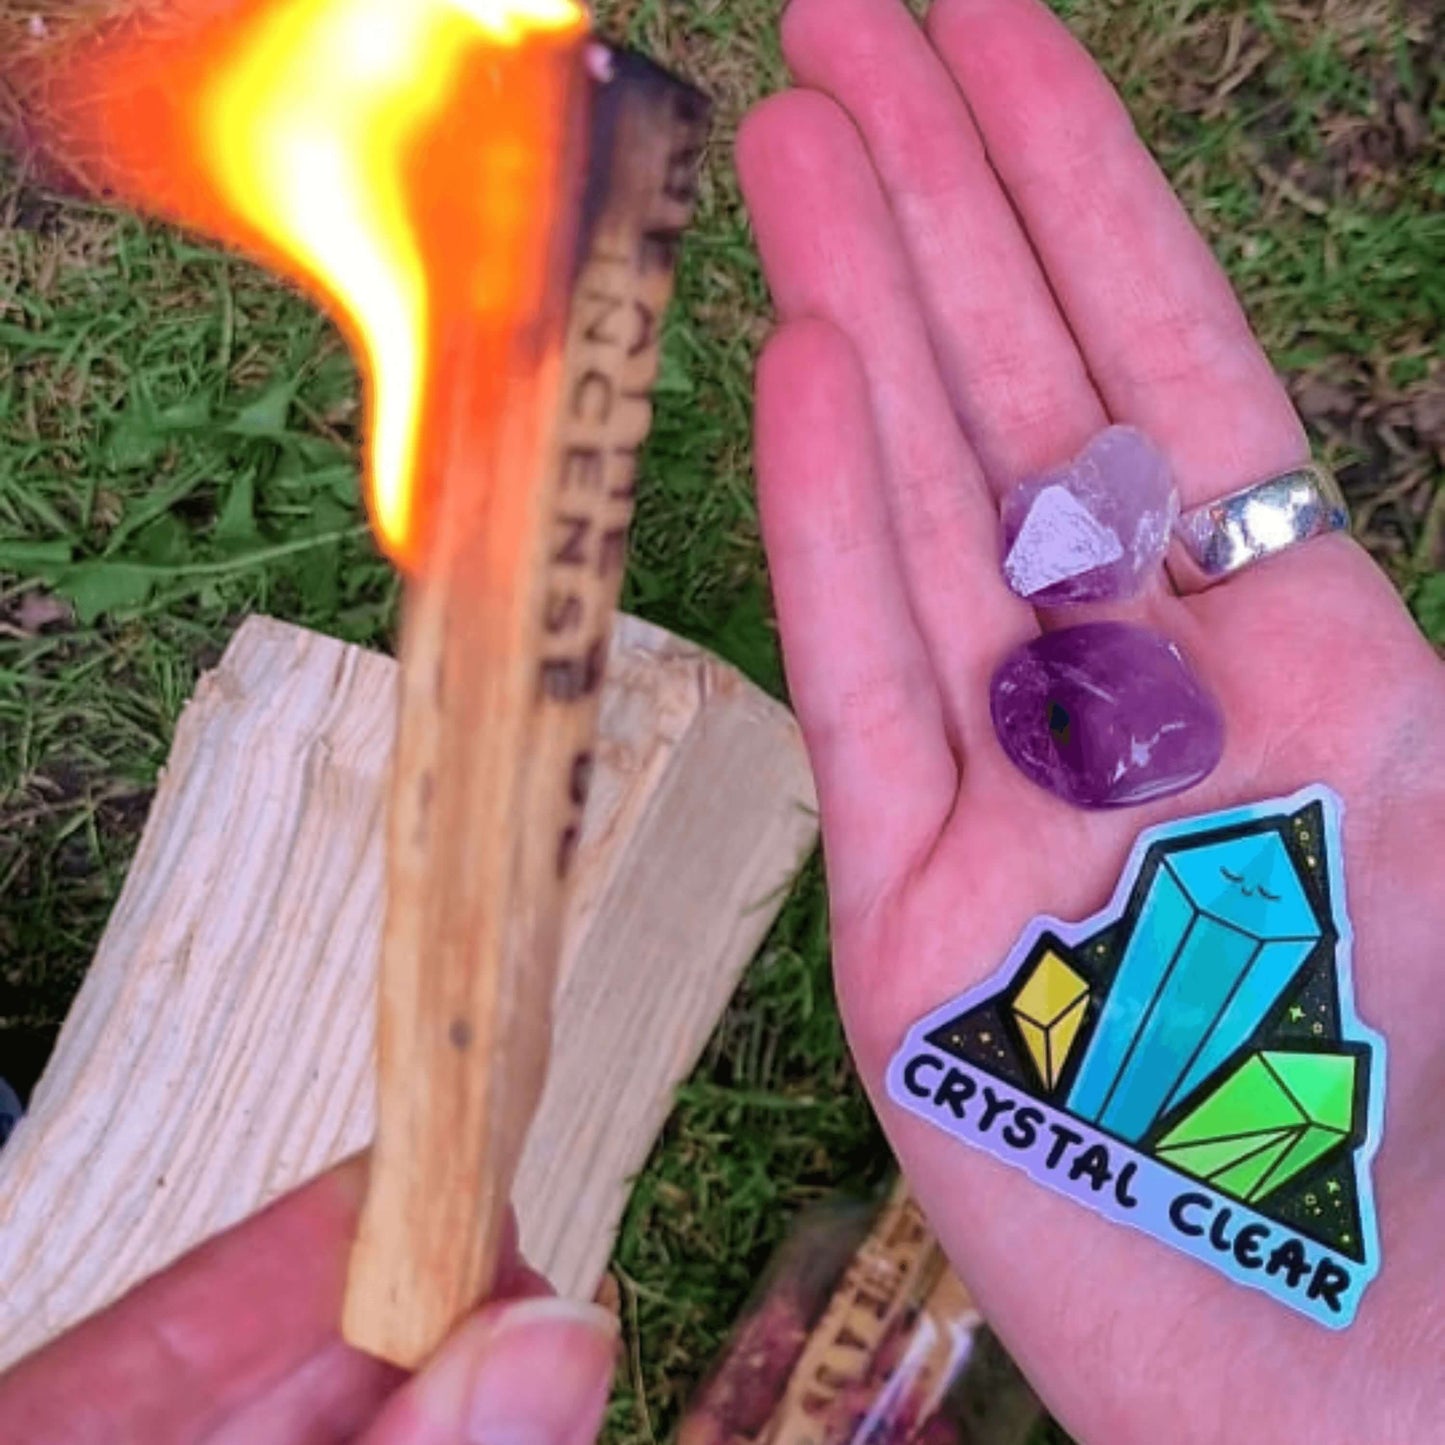 The Crystal Clear Holographic Sticker being held outside with a burnt incense stick and amethyst crystals. The triangle shaped sticker features three green crystal towers on a black sparkly background with bottom text reading crystal clear, the centre crystal is smiling. Inspired by witchy spiritual healing with crystals.